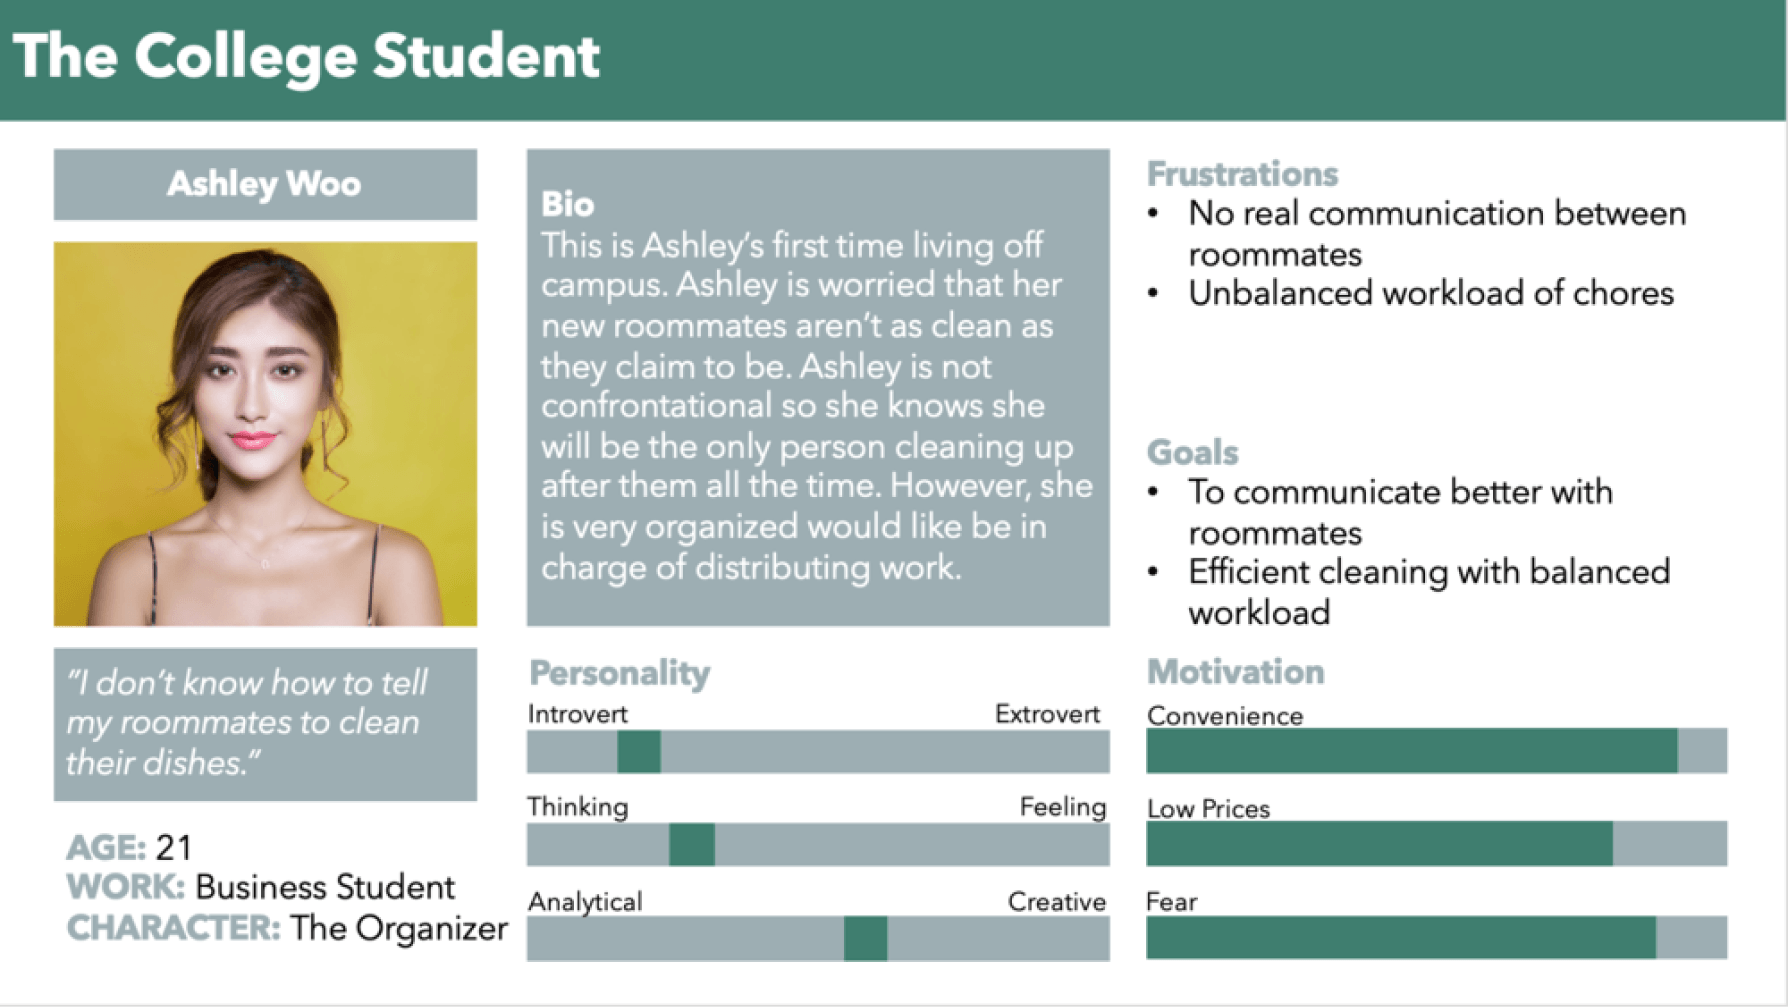 Ashley, our persona. She is a freshman college student getting adjusted to her new life in college.